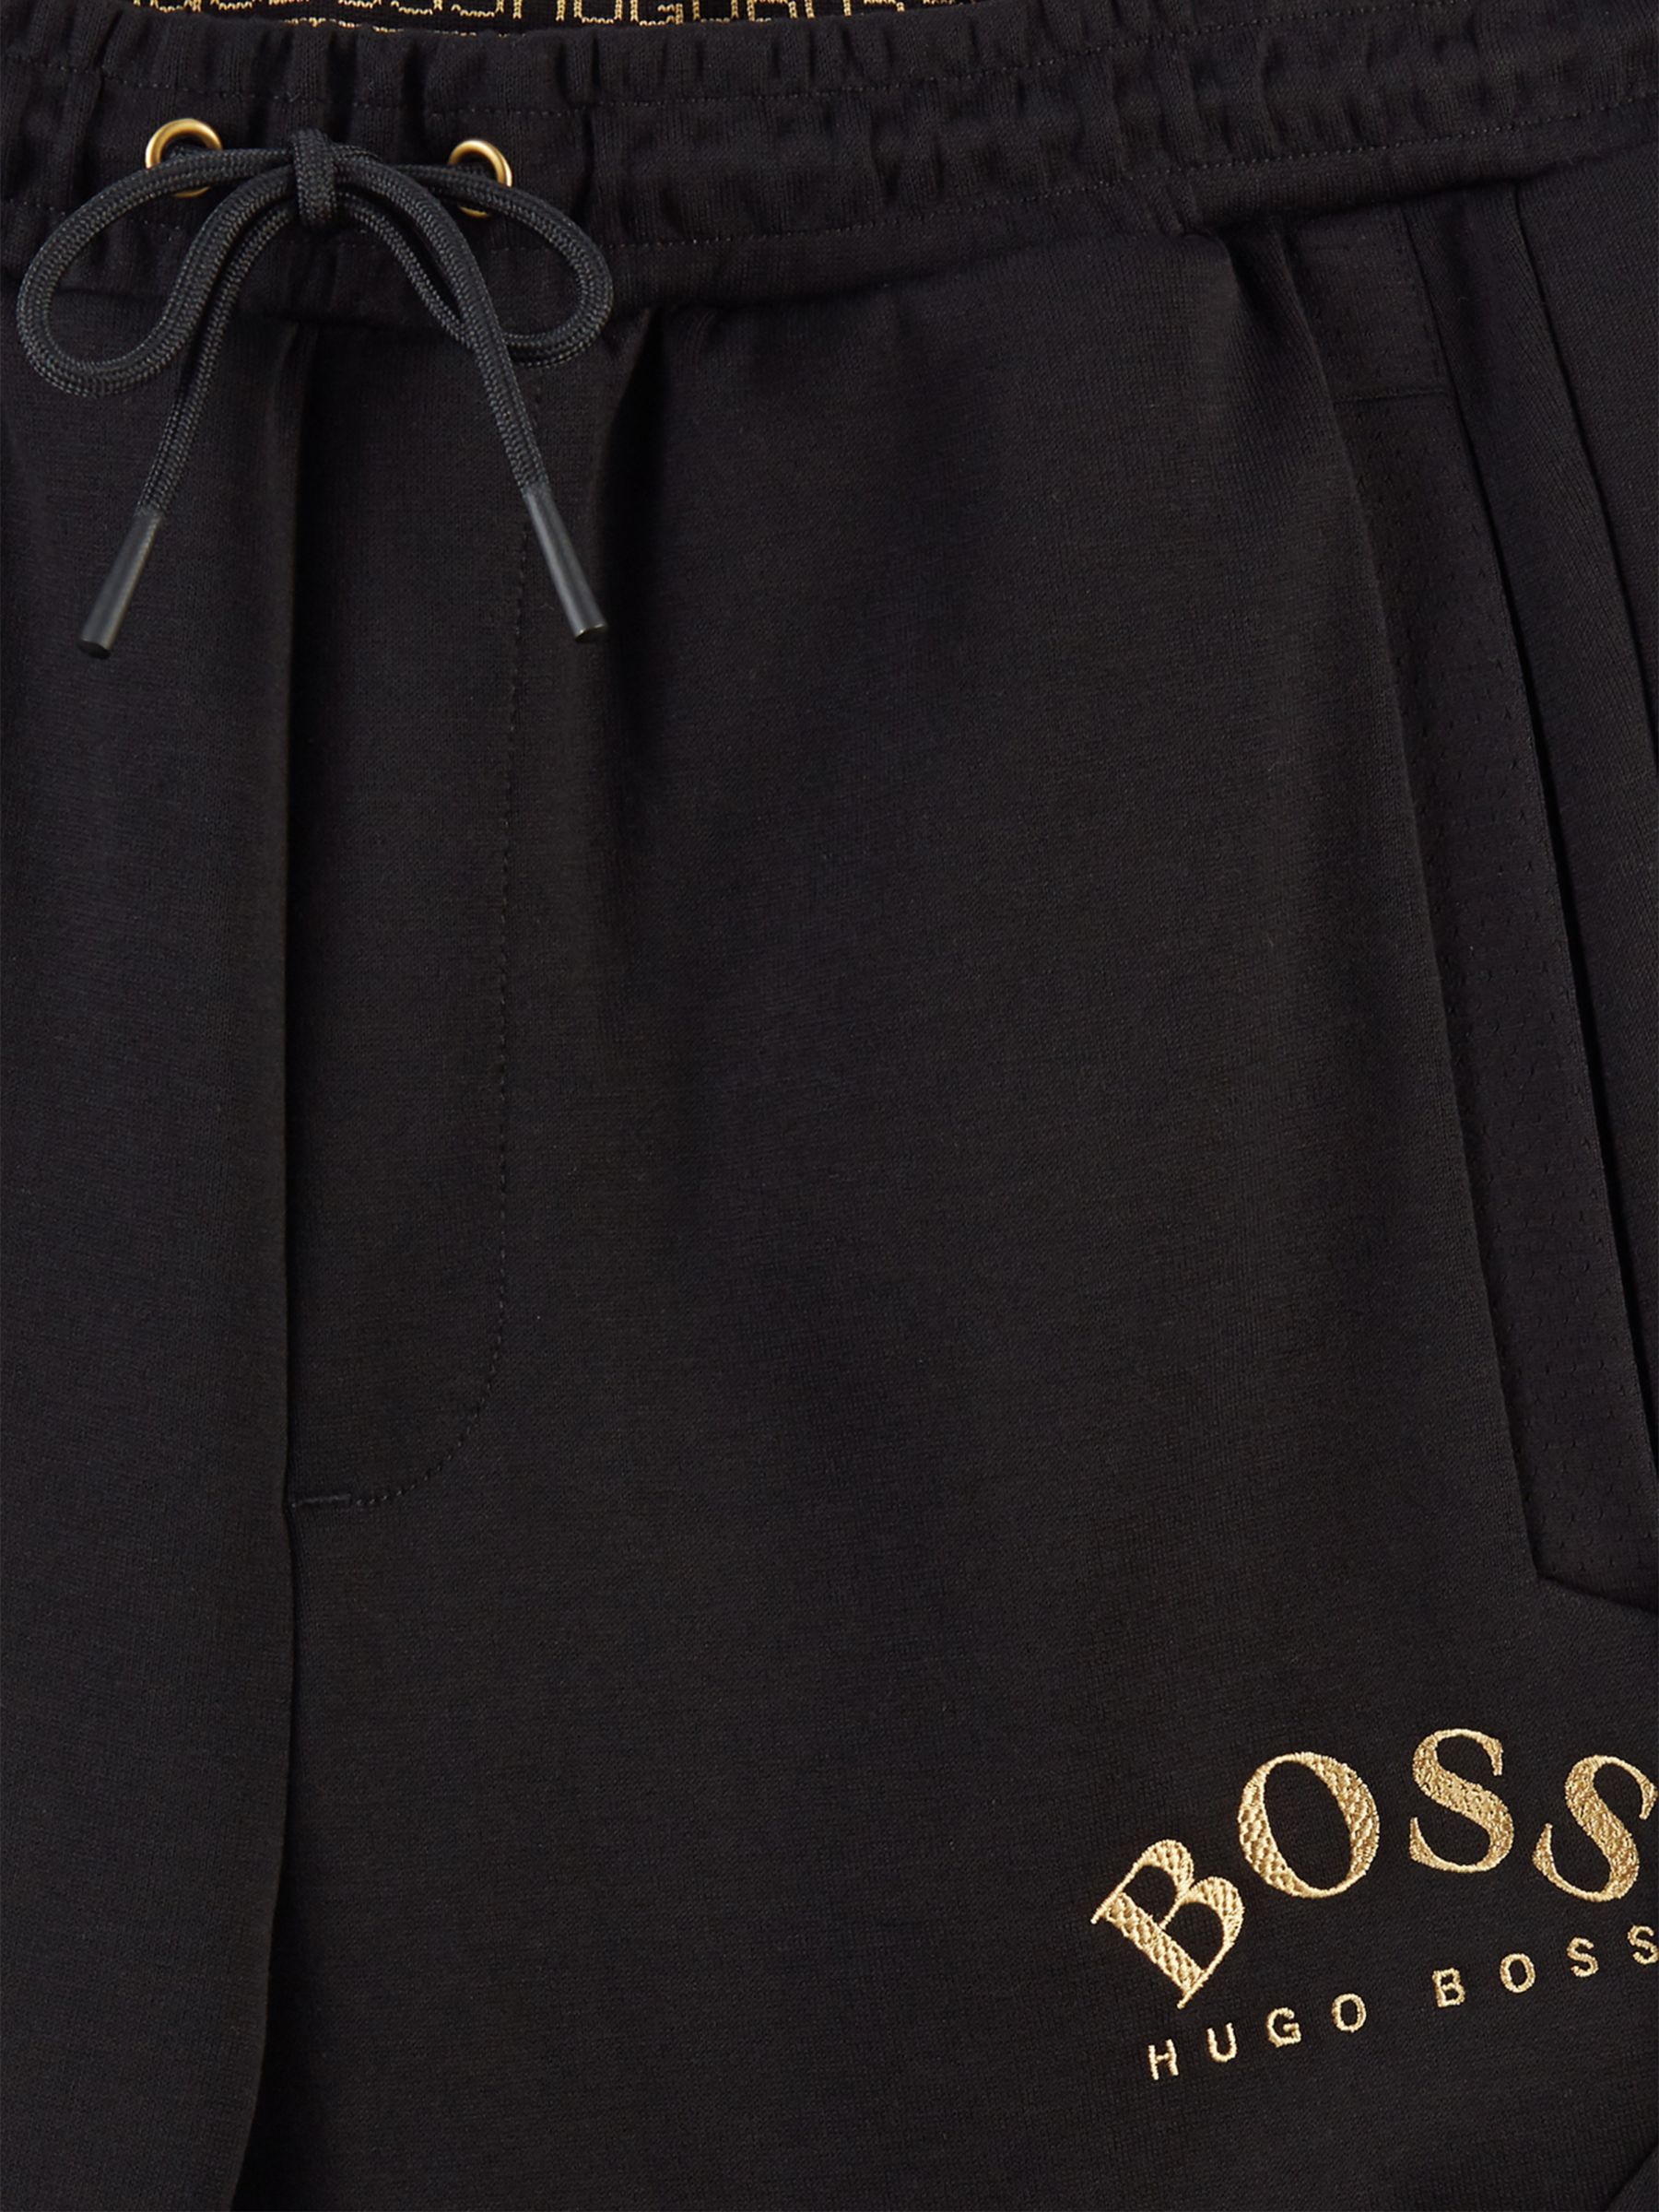 black and gold hugo boss joggers